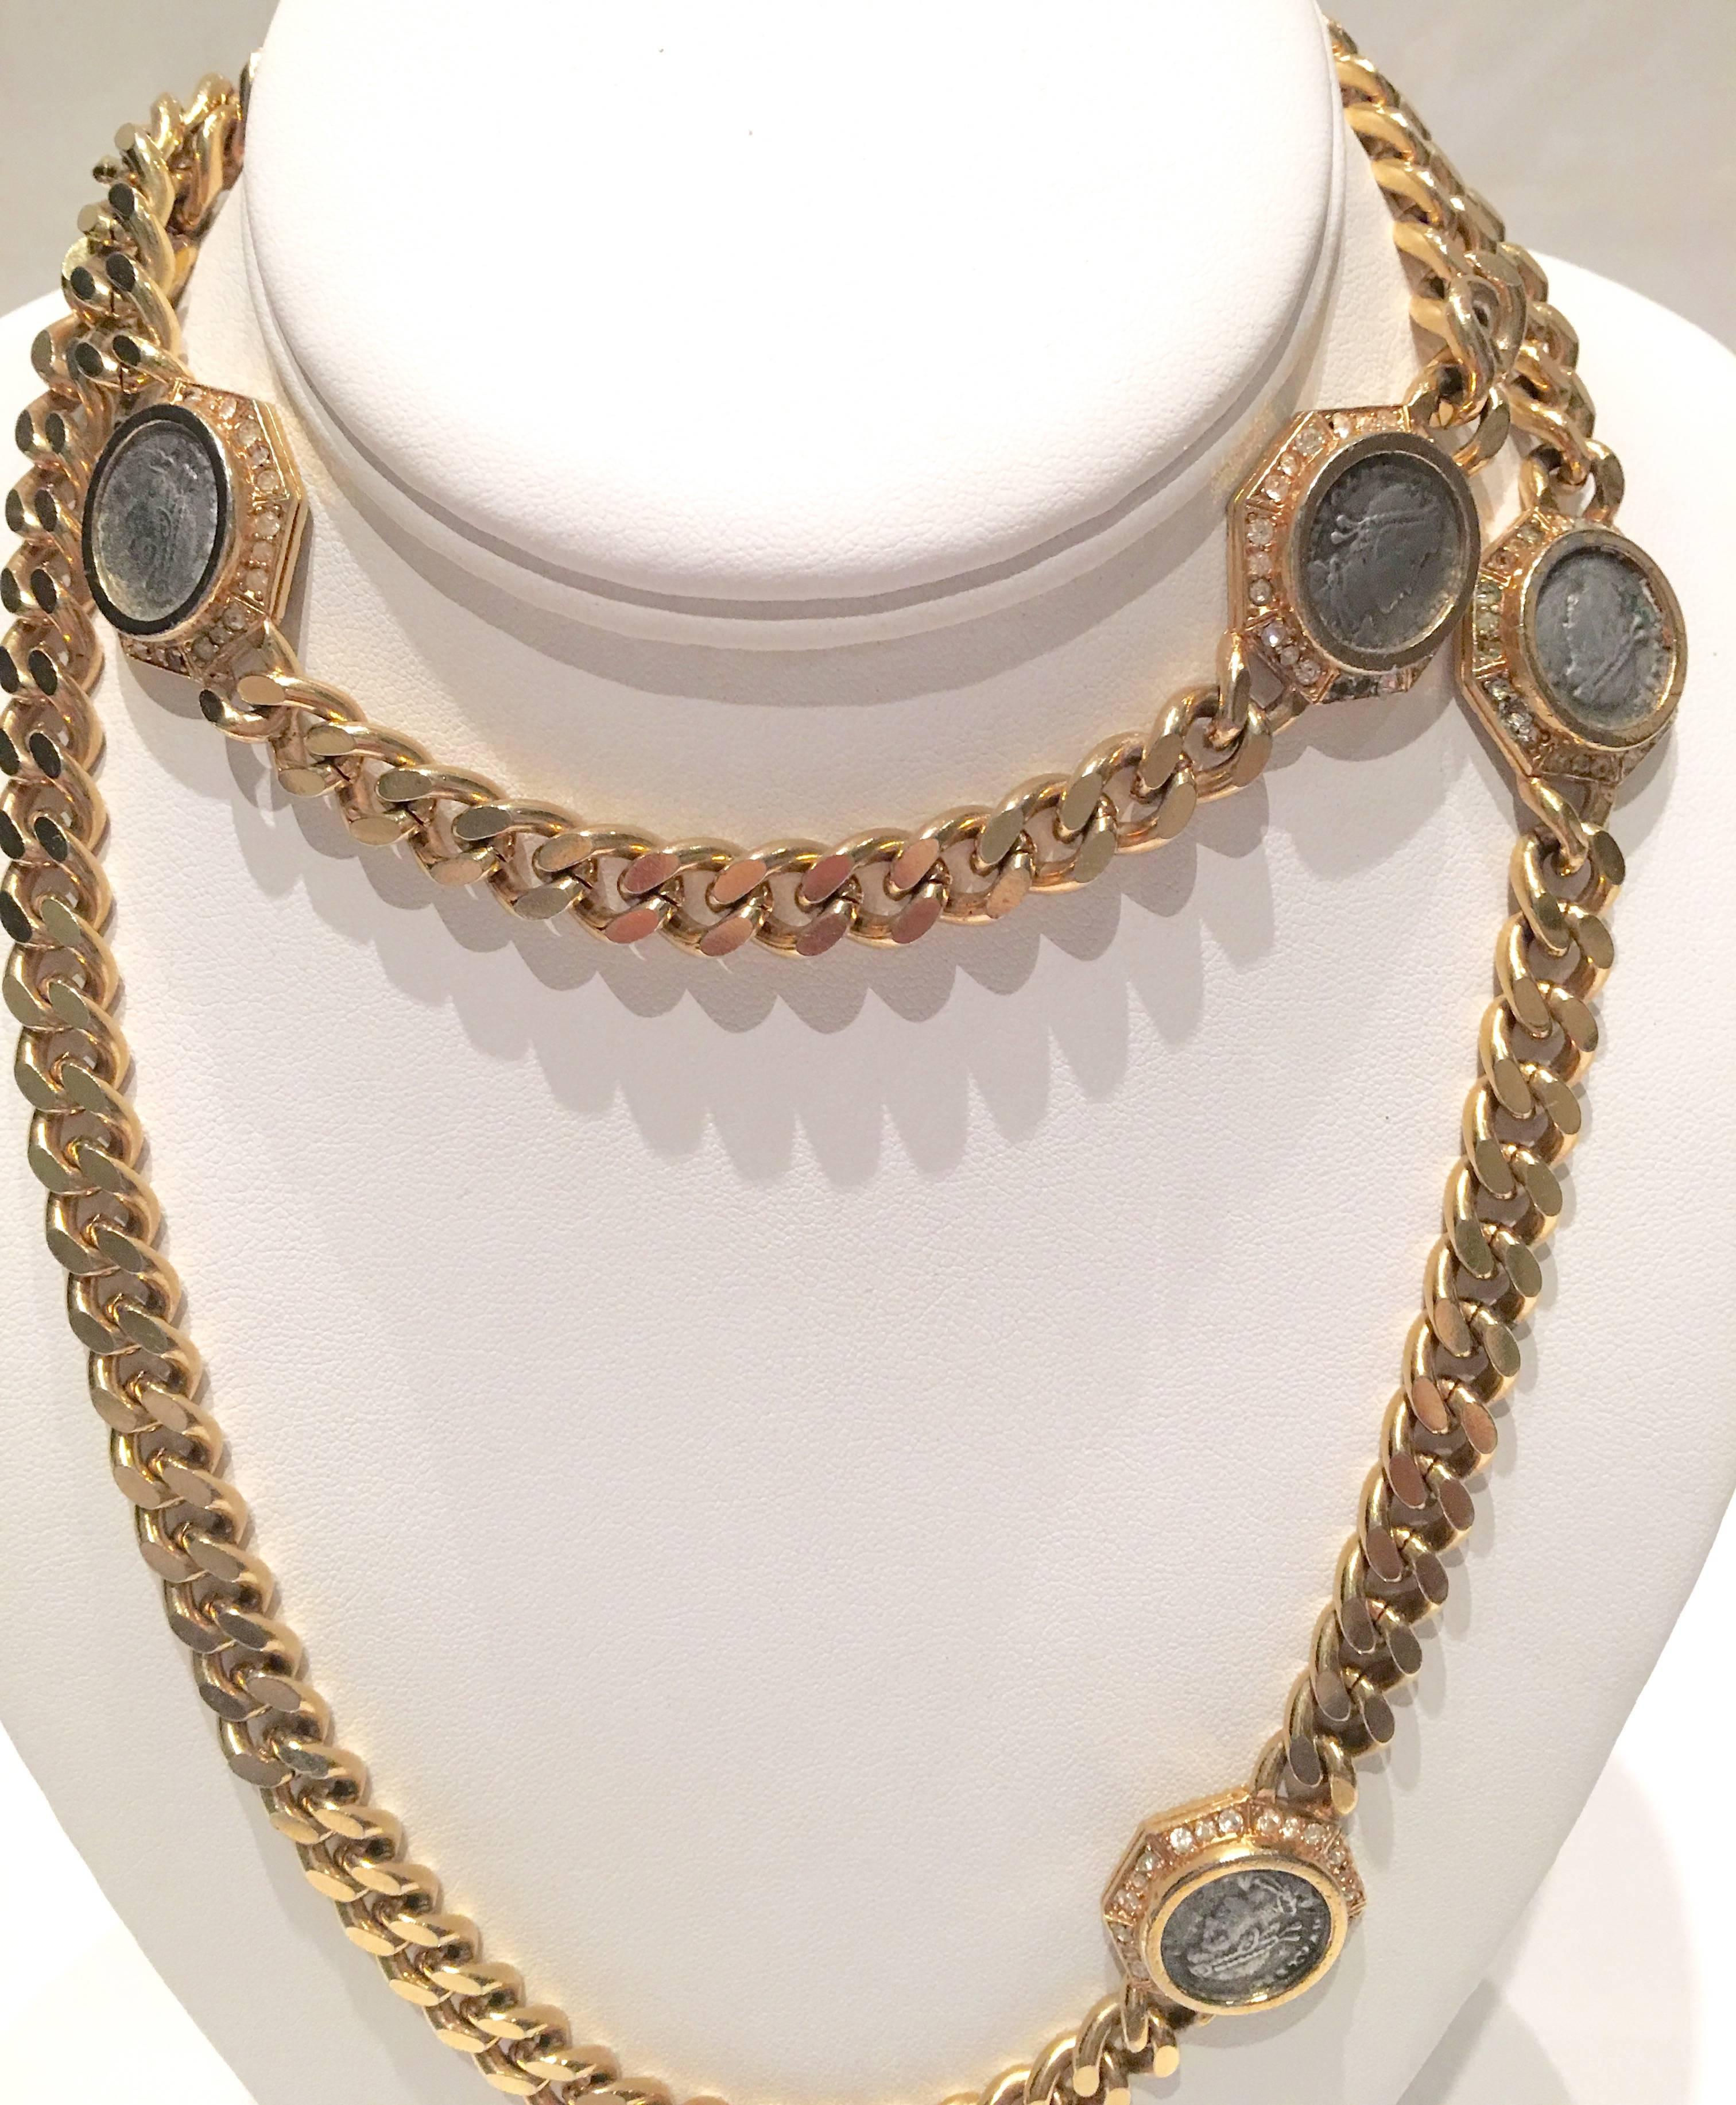 Rare Ciner opera length 18-karat yellow gold plated with faux roman coins in pewter surrounded by pave crystal rhinestones chain link rope necklace. Each of the four roman coins are surrounded by clear crystal rhinestones and measures, 1"